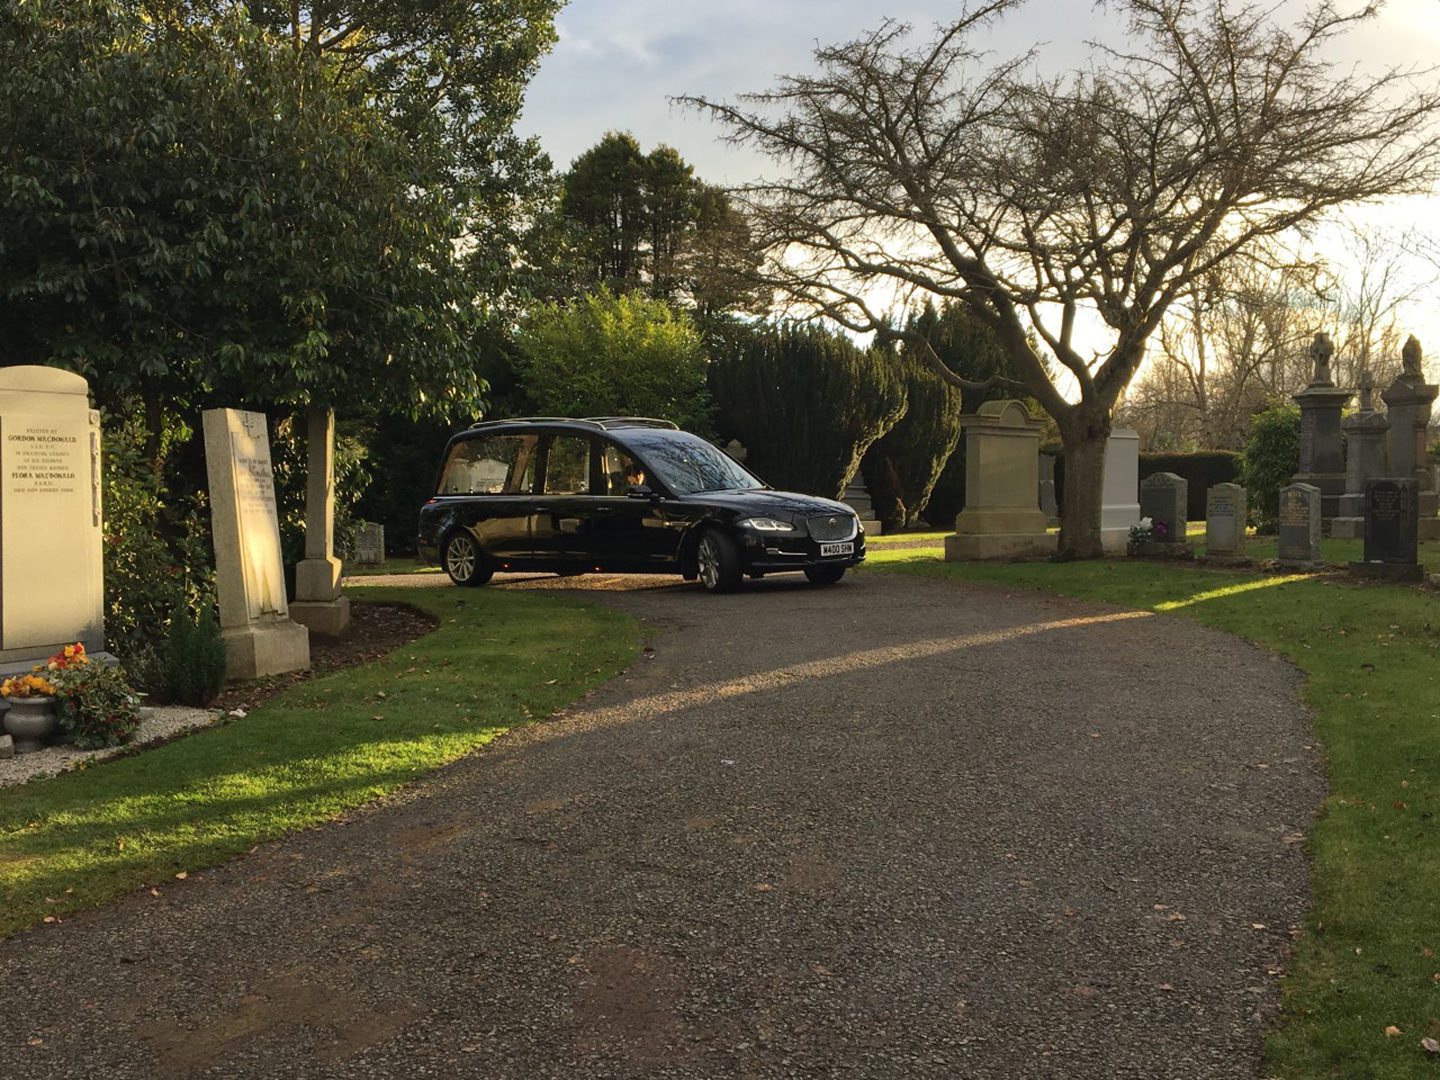 hearse arriving at cemetery